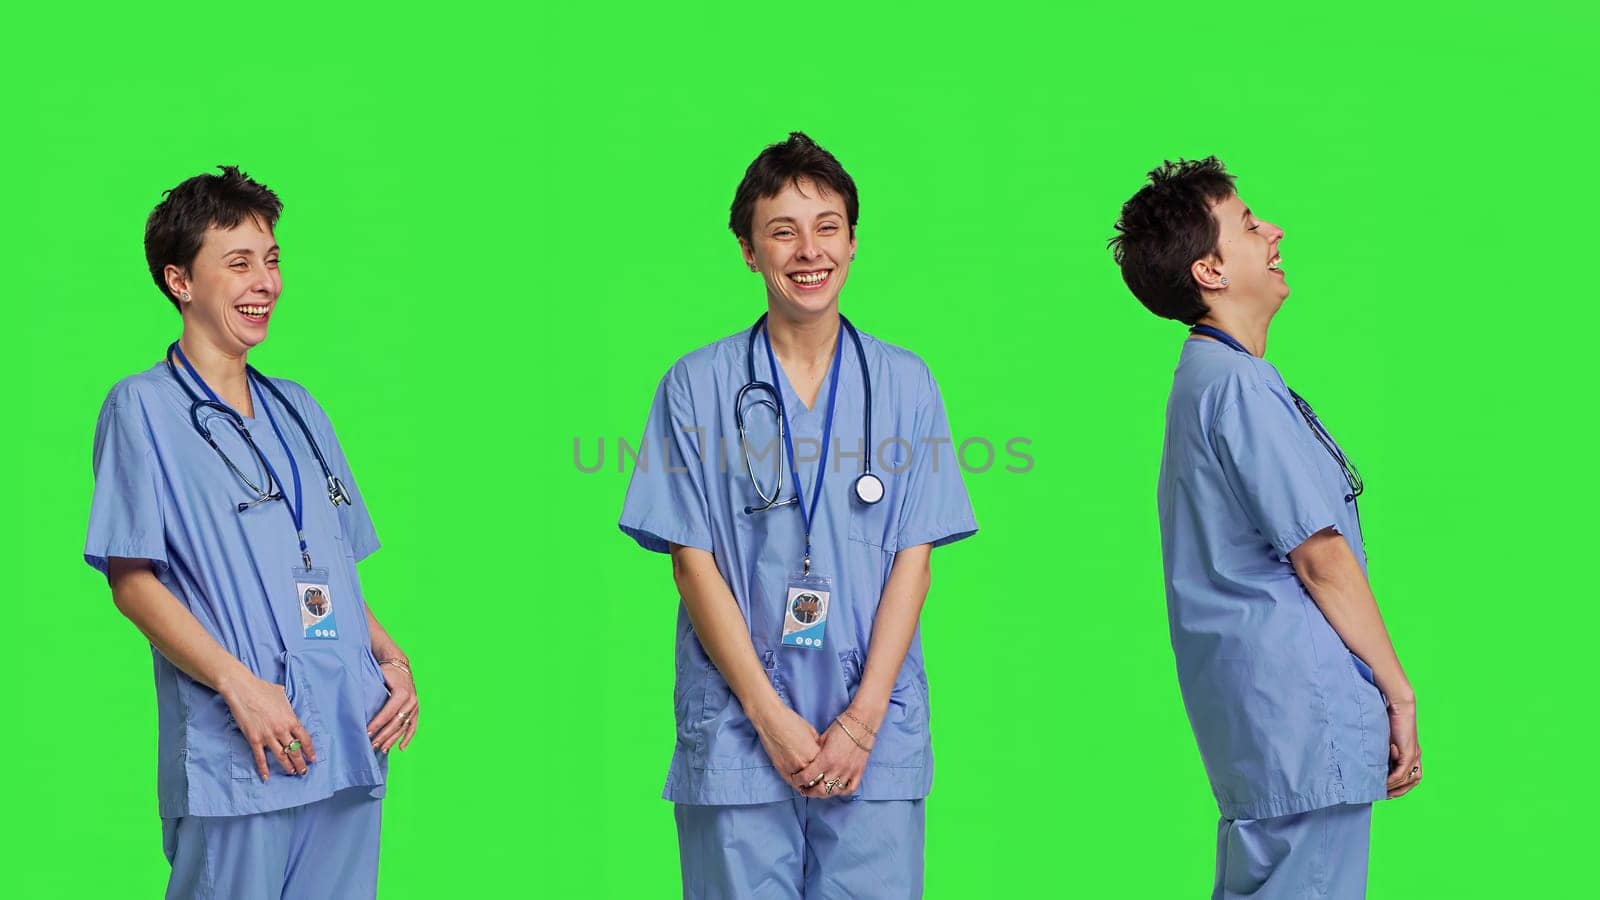 Cheerful smiling medical assistant standing against greenscreen backdrop by DCStudio